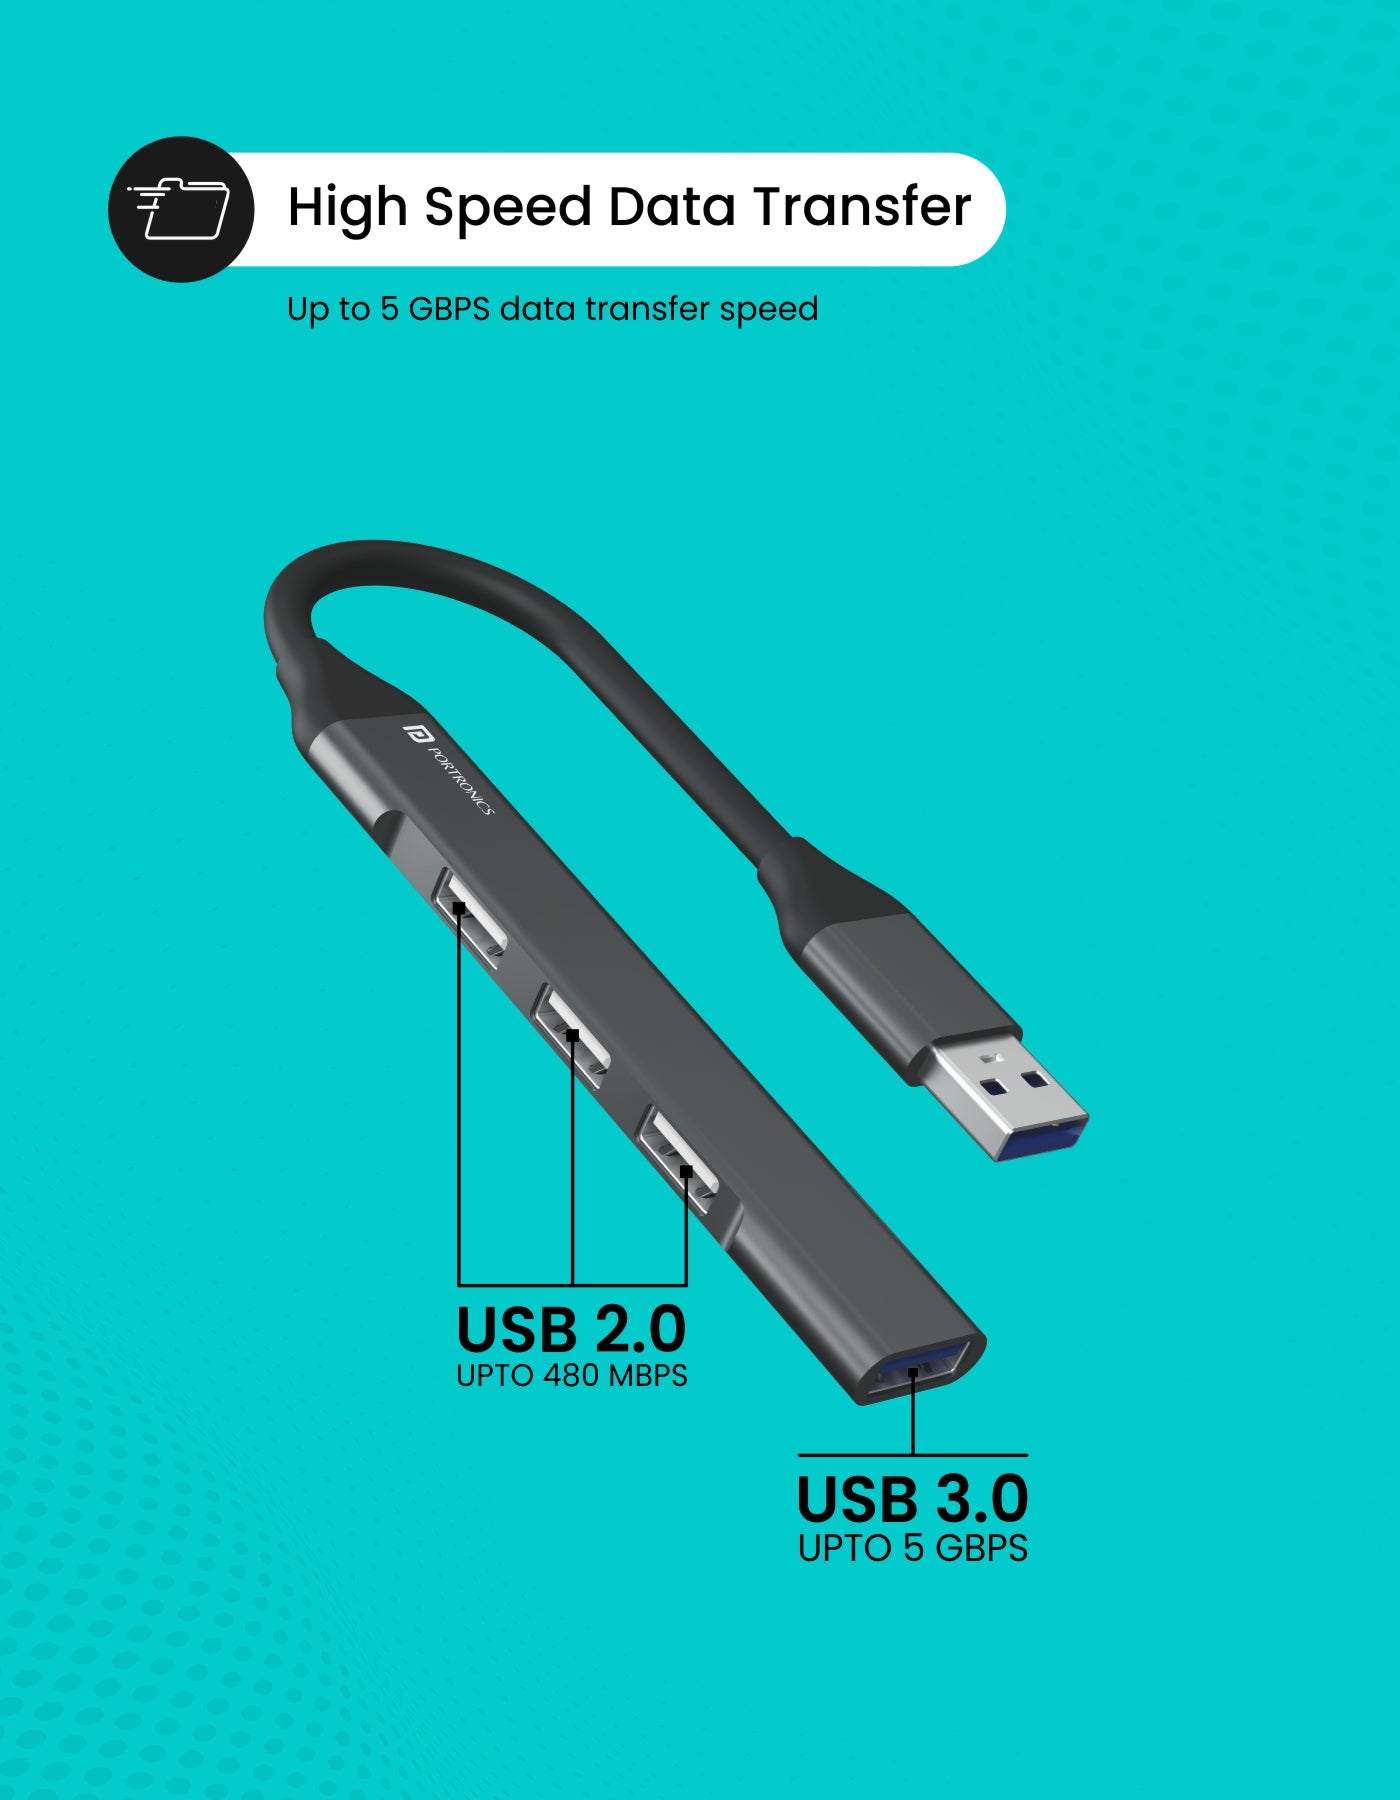 By Portronics Mport 31 USB hub high speed data transfer Up to 5 GBPS